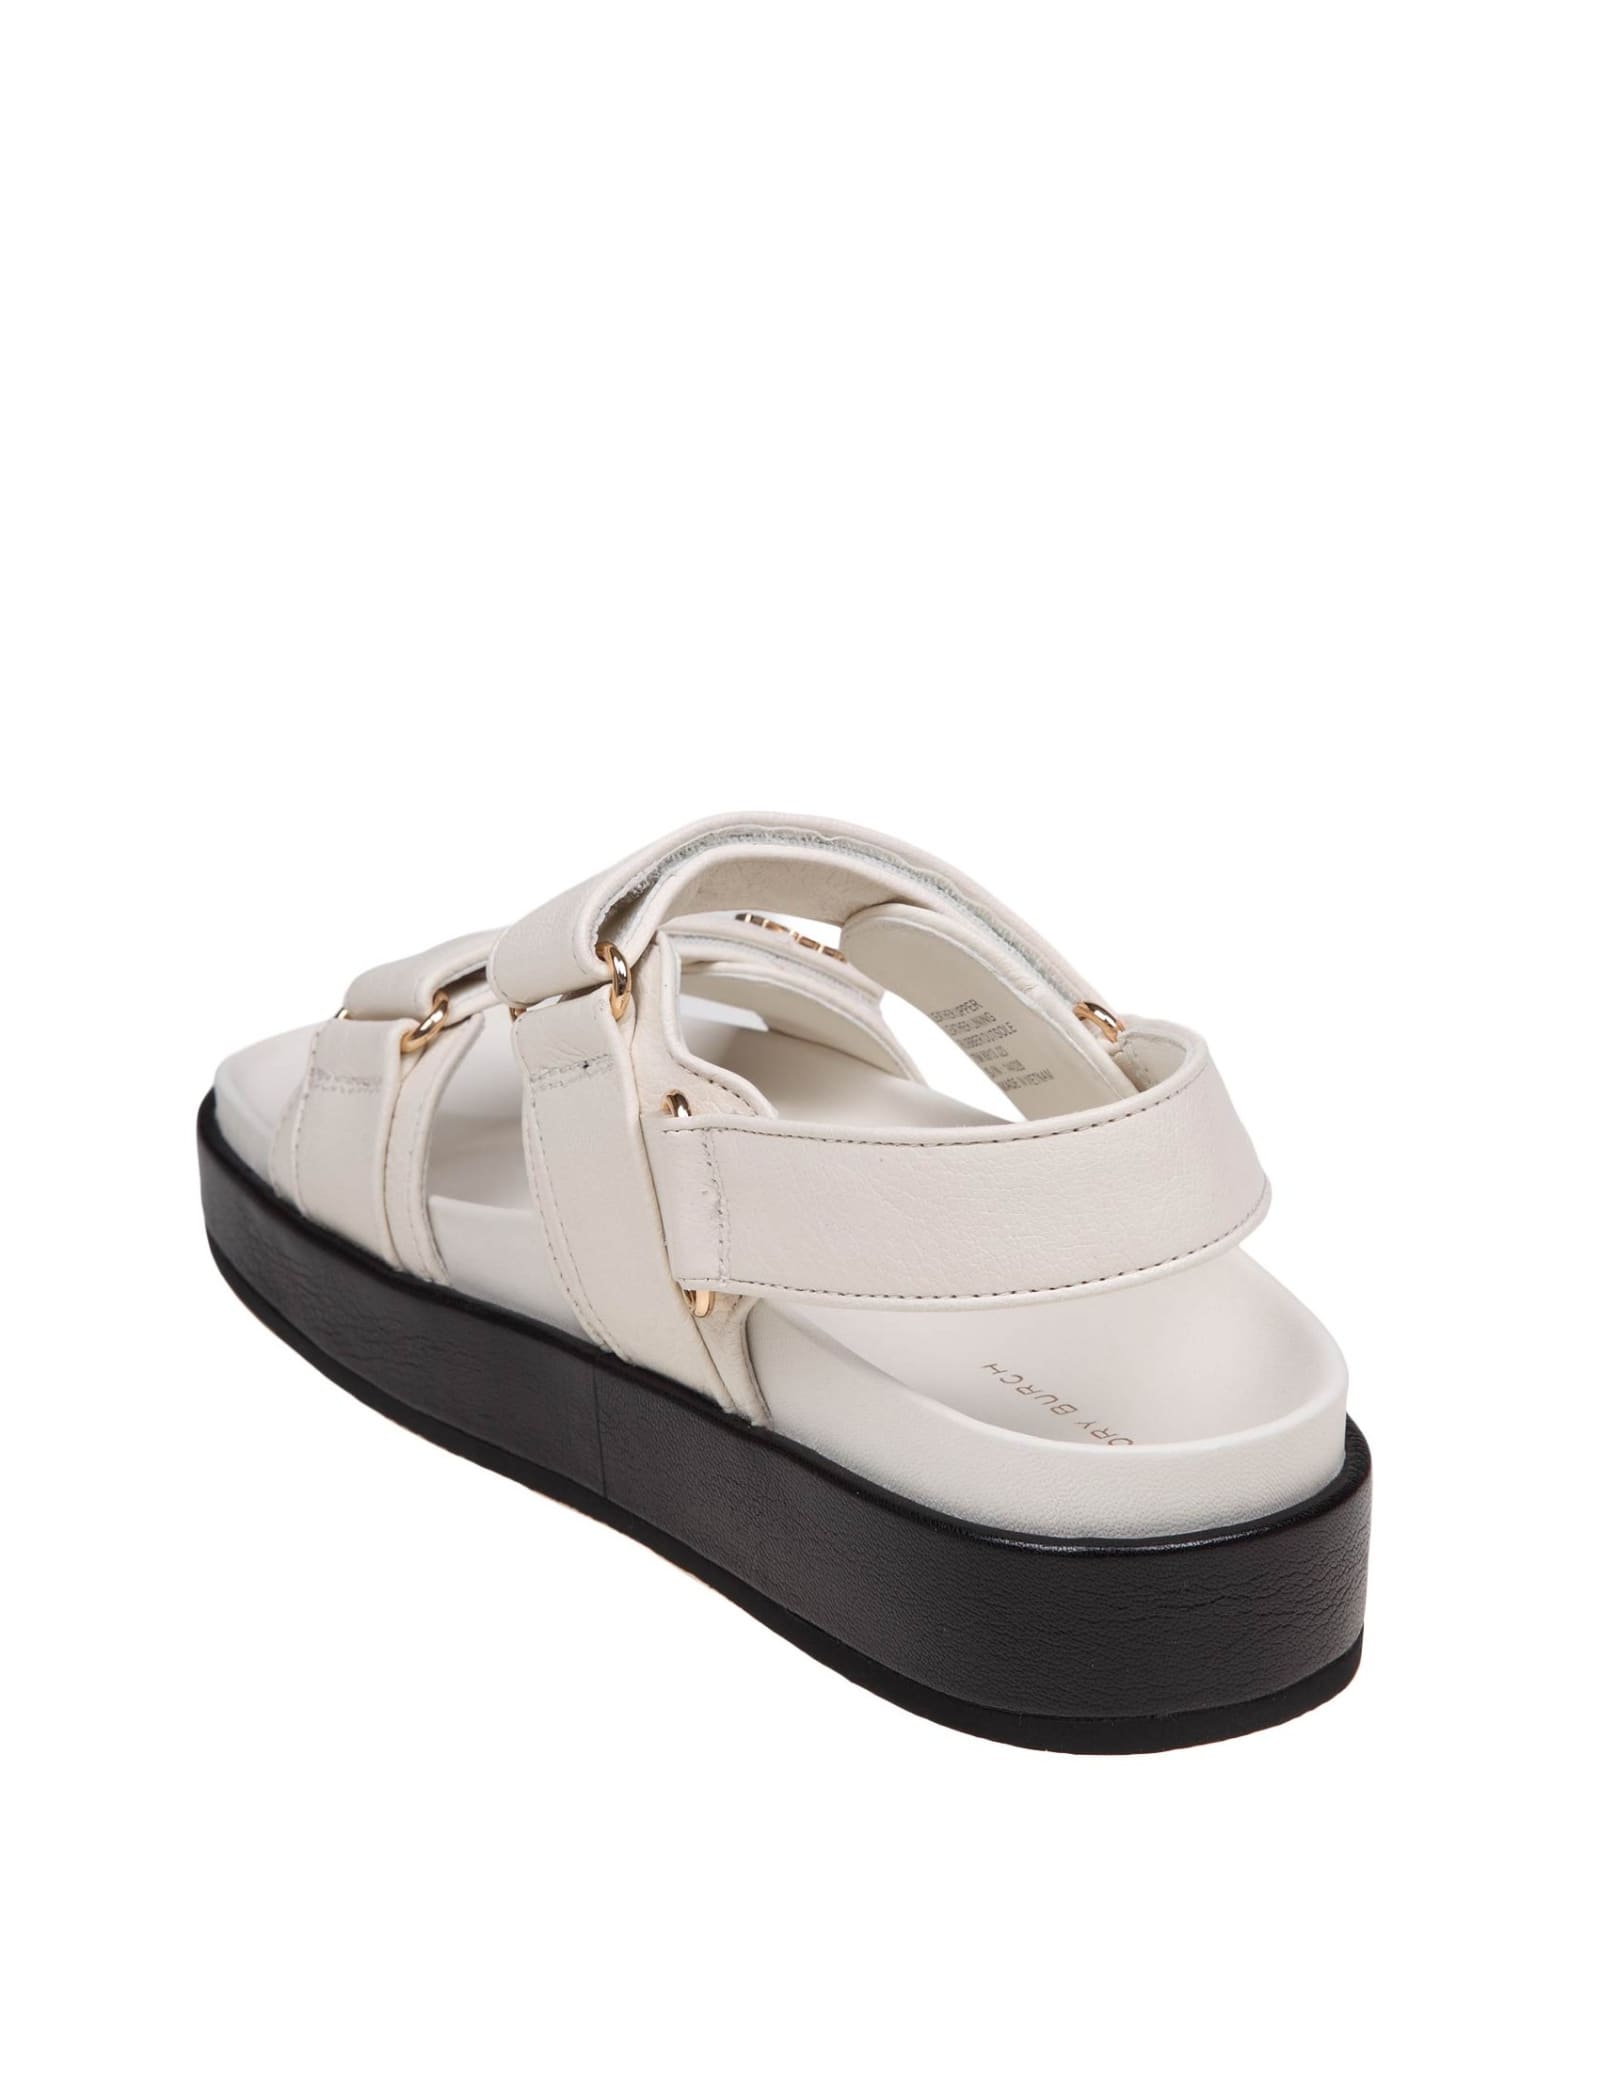 Shop Tory Burch Kira Sport Sandal In Ivory Leather In New/ivory